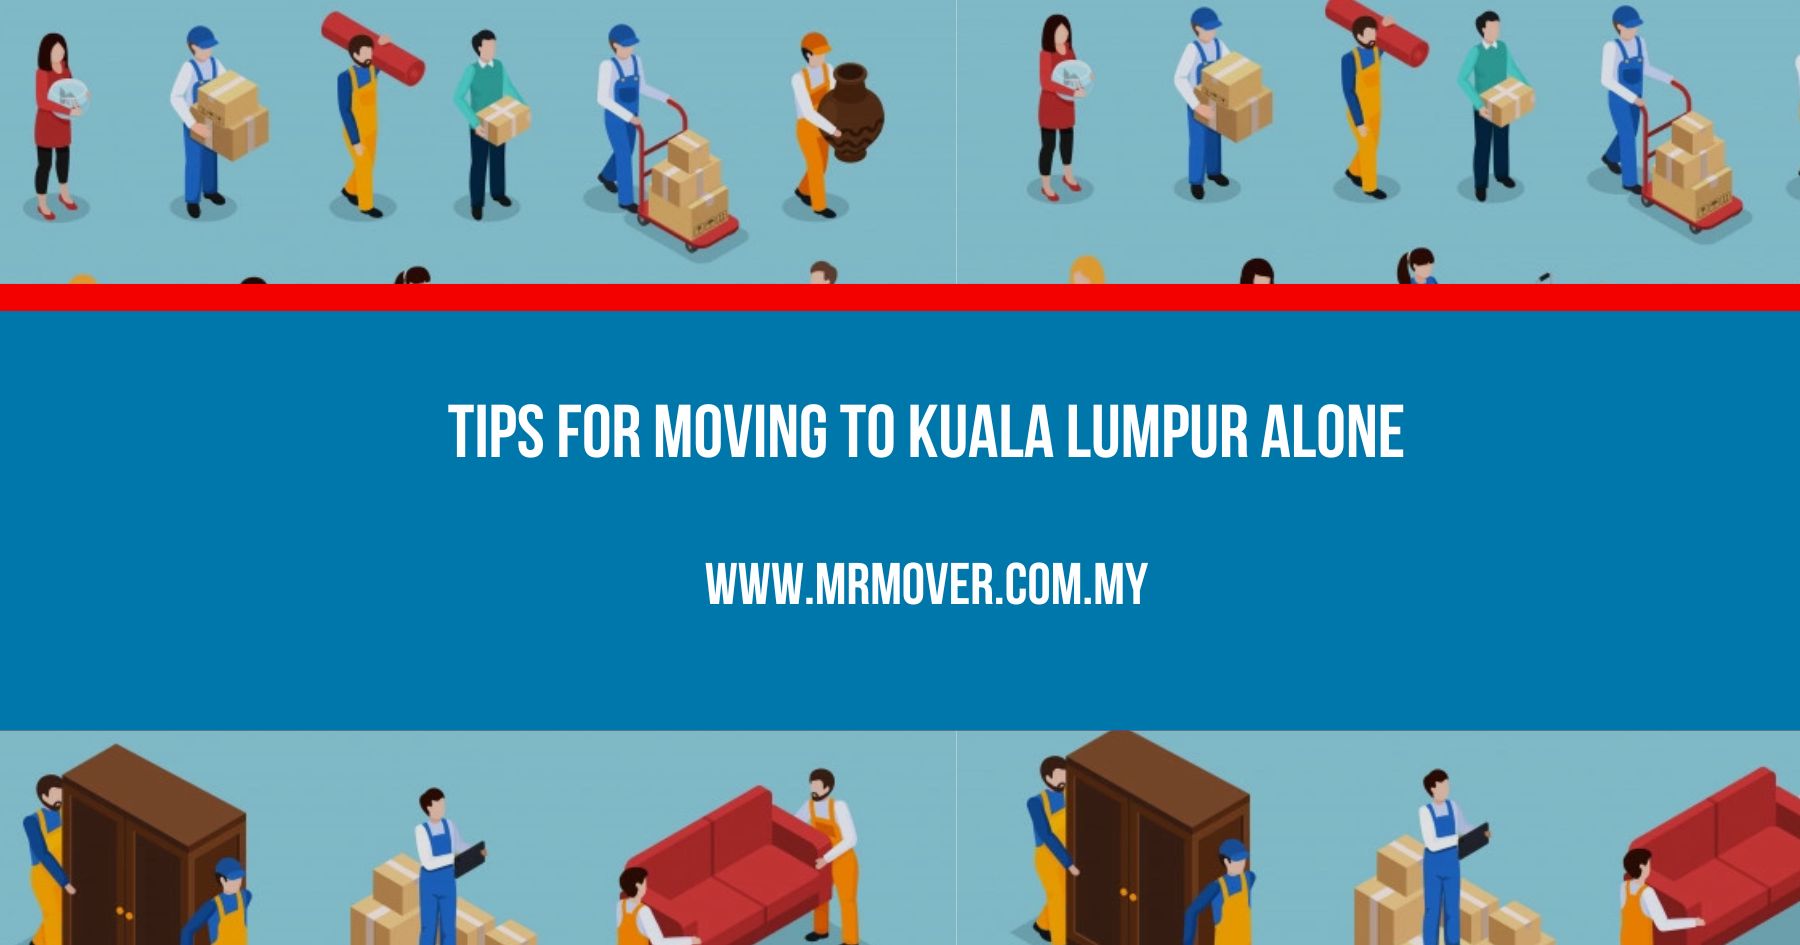 Tips For Moving to Kuala Lumpur Alone